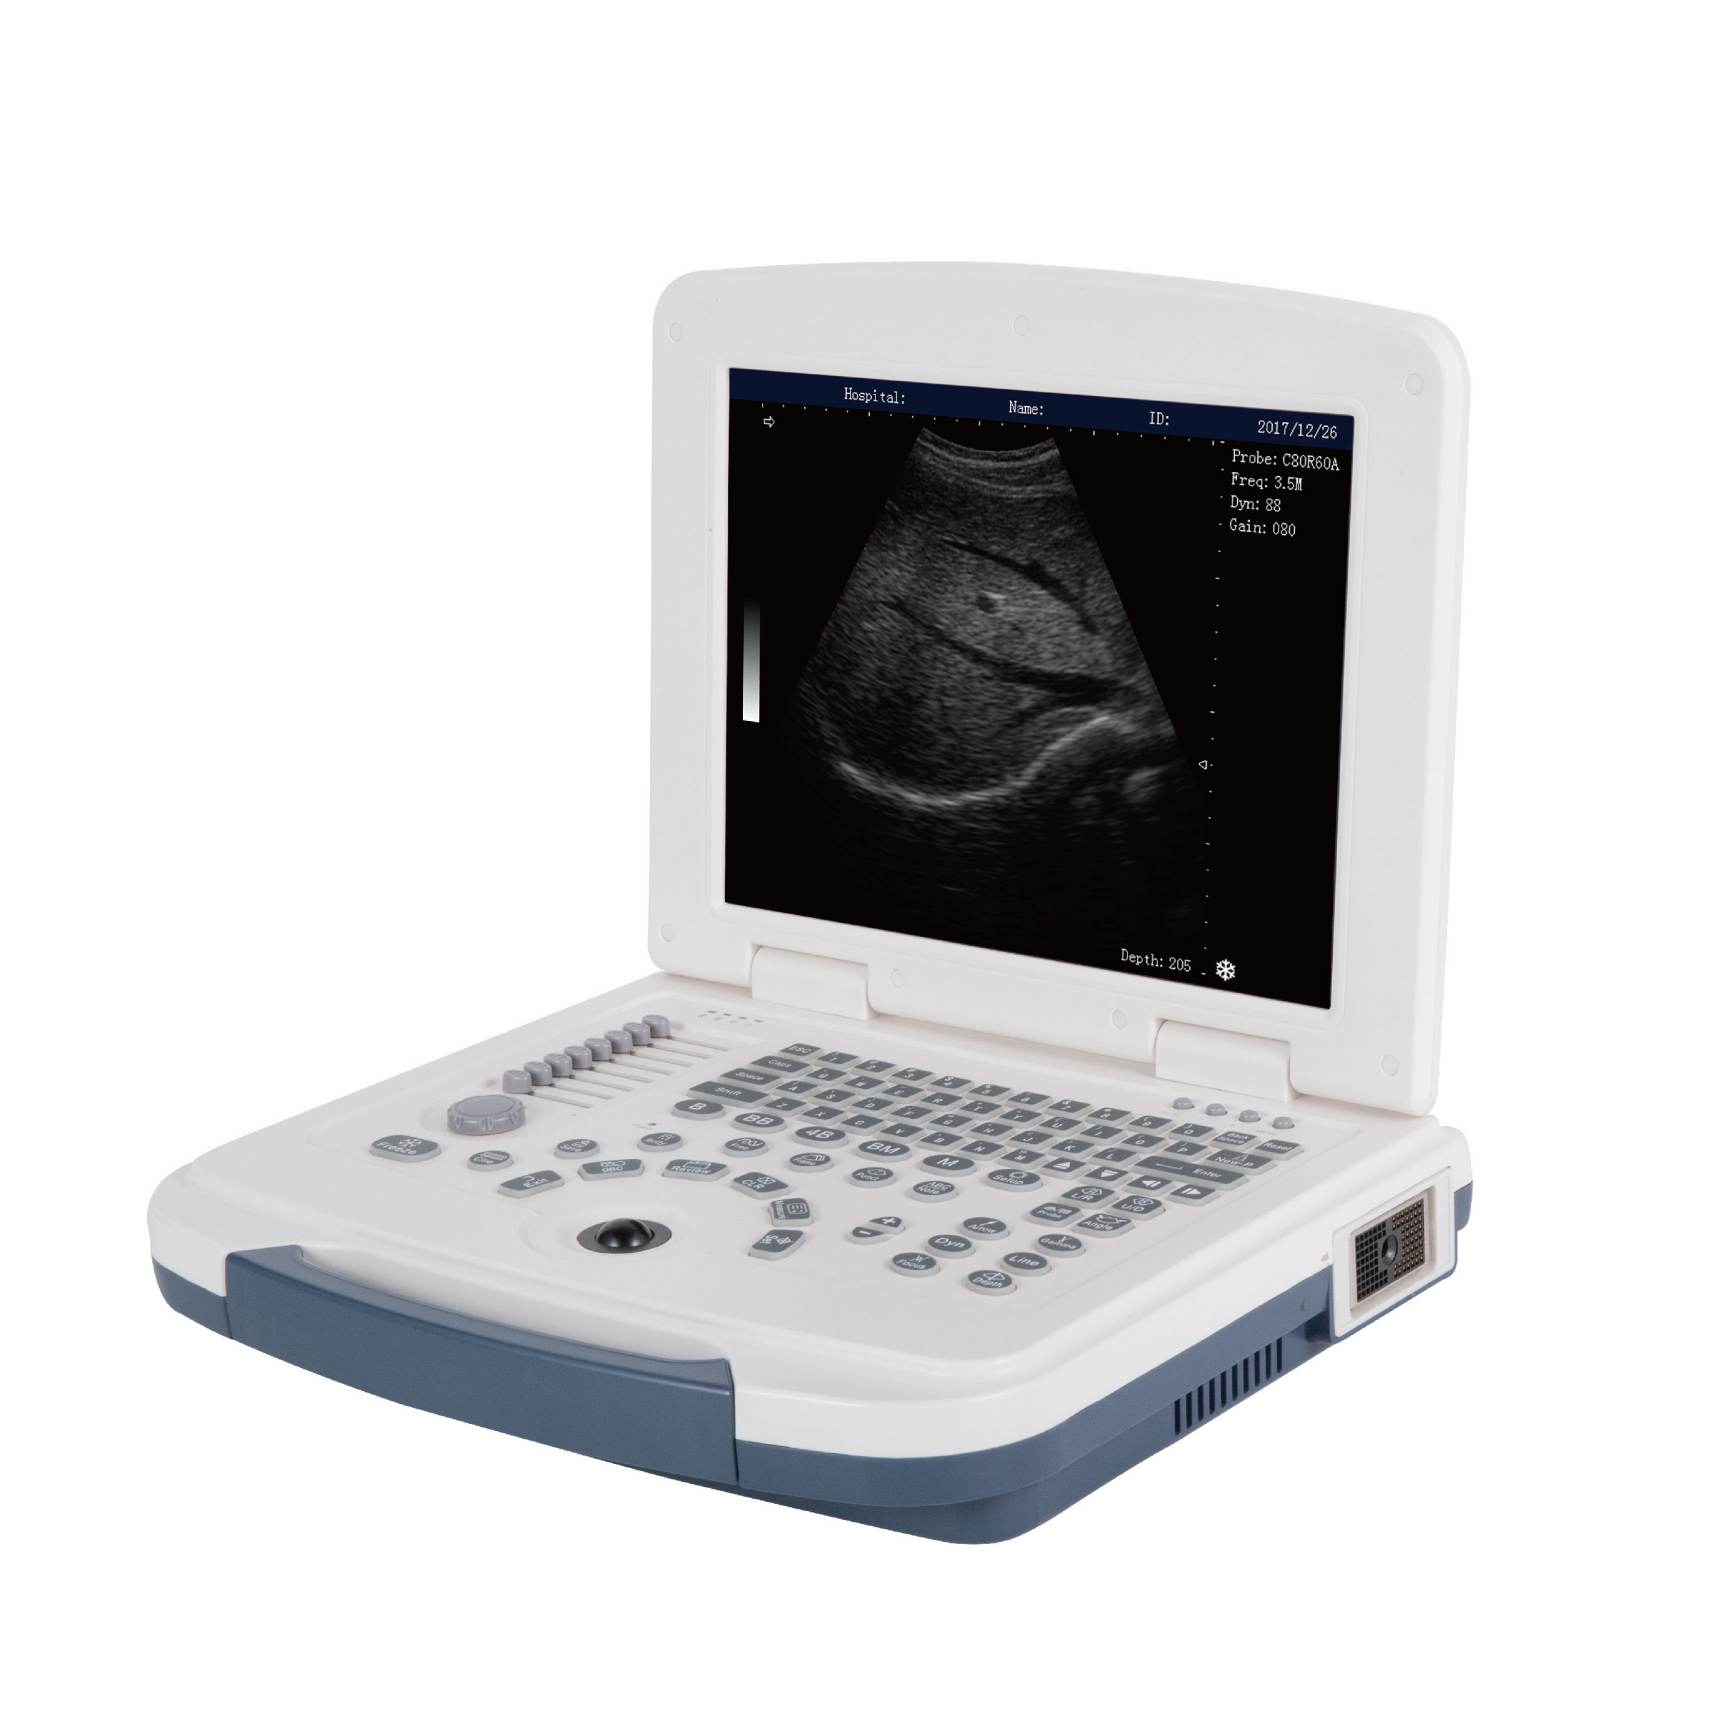 hot sells B/W ultrasonic diagnostic devices laptop ultrasound scan machine price